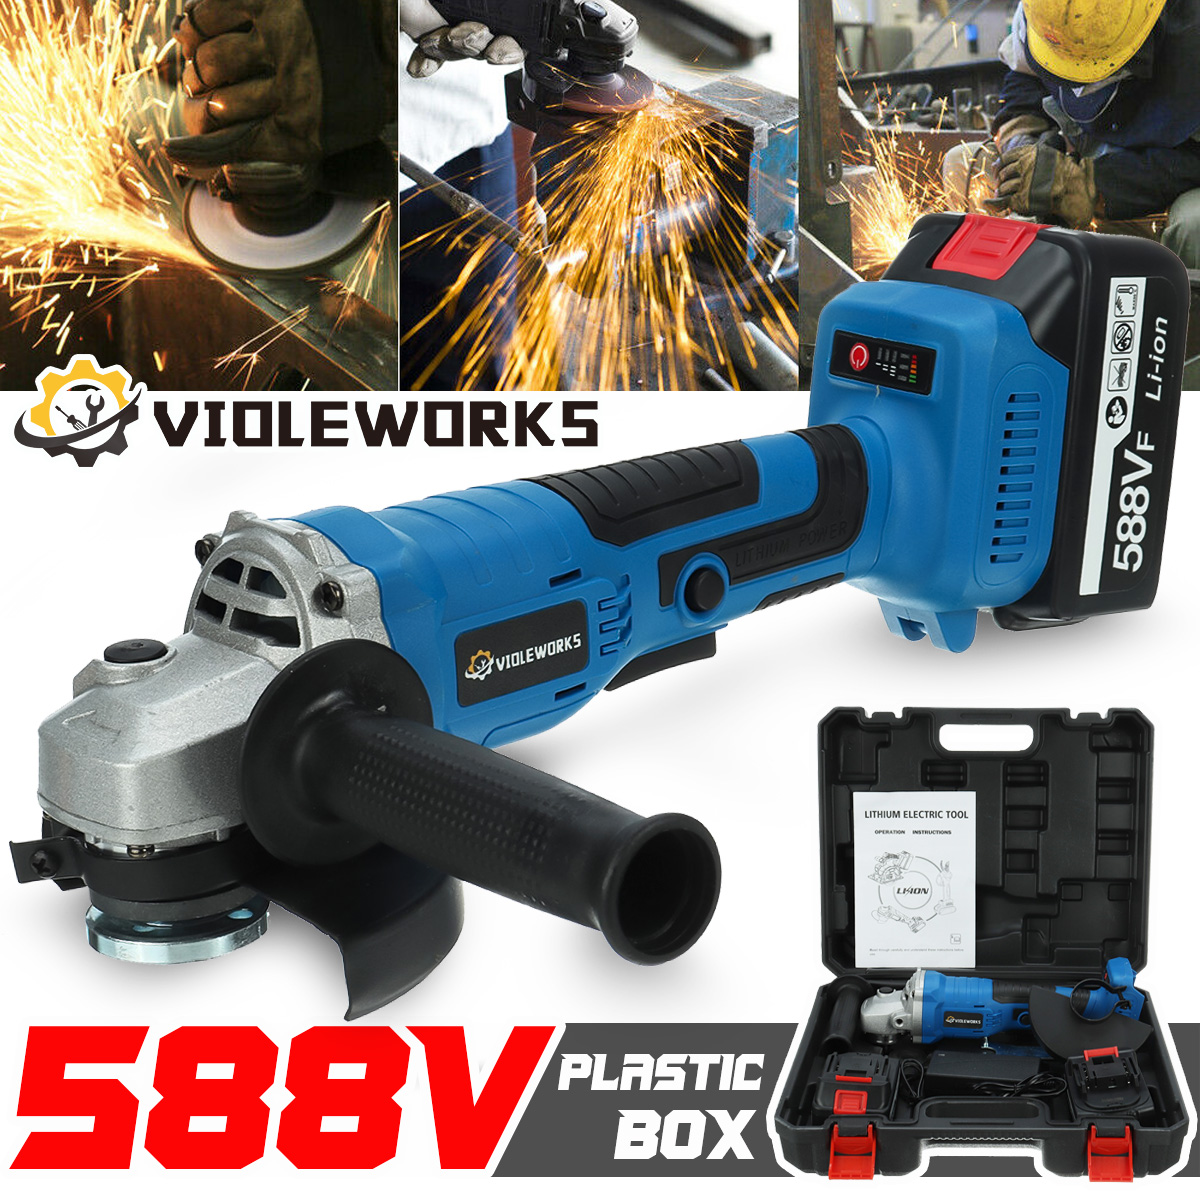 VIOLEWORKS-588VF-125mm-Cordless-Angle-Grinder-Cordless-Electric-Grinding-Cutting-Polishing-Tool-W-12-1847101-2